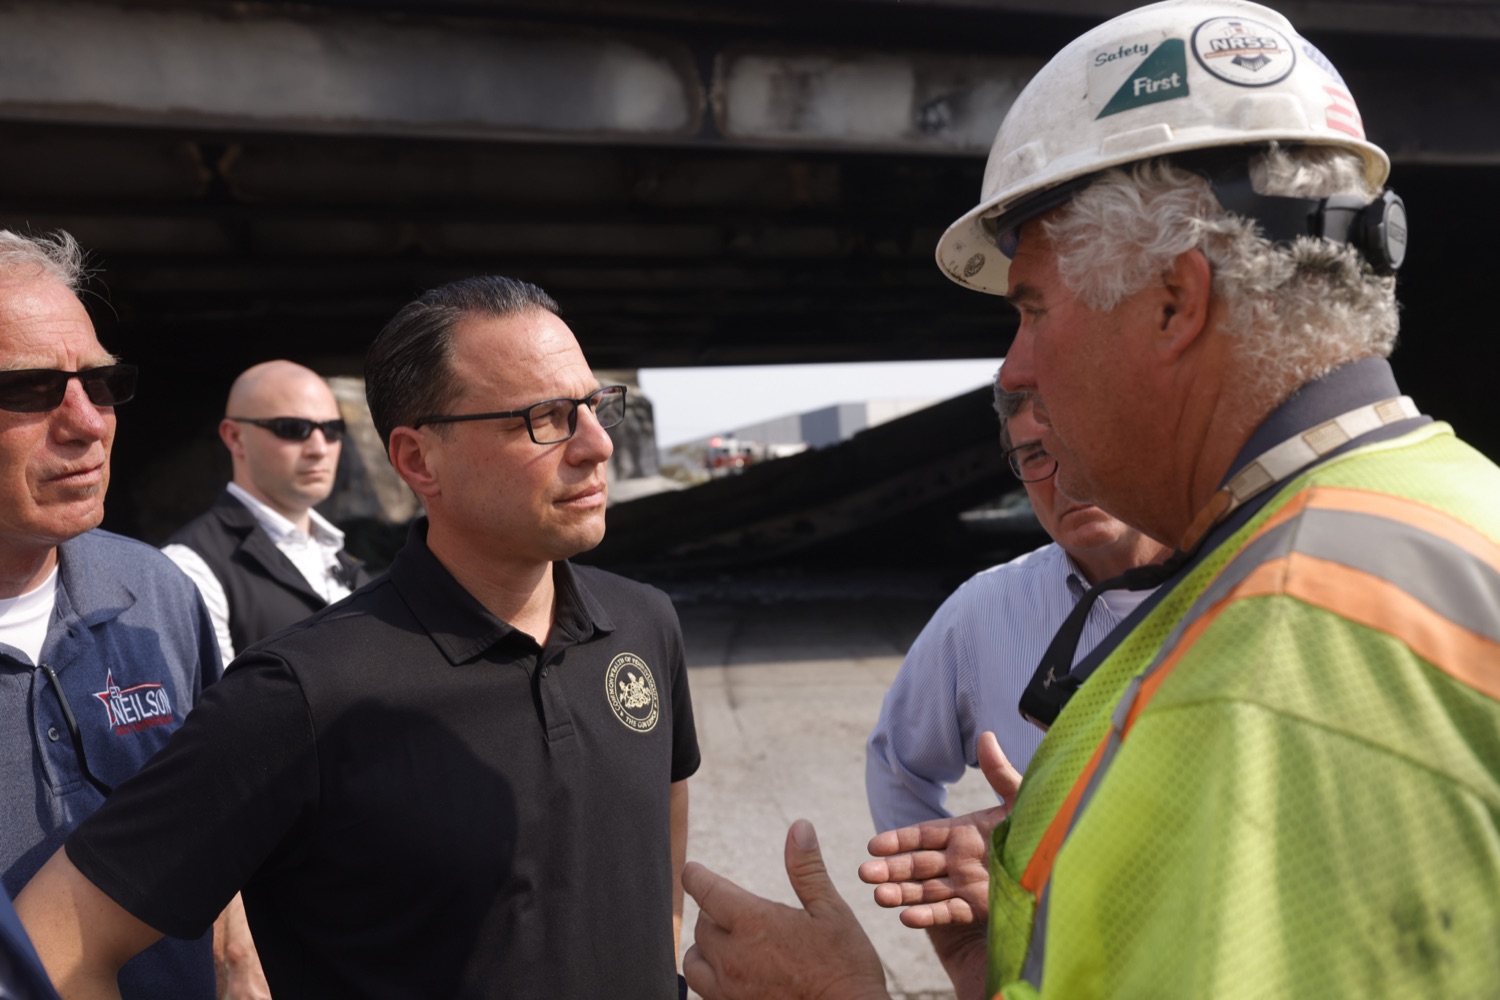 Workers at the site speak with Governor Josh Shapiro and about conditions on the ground.  Governor Josh Shapiro, along with officials from the Shapiro Administration, the City of Philadelphia, and SEPTA provided an update on the response to the vehicle fire on the Route 73/Cottman Avenue ramp under Interstate 95 in Philadelphia, which caused the roadway in this area to partially collapse, and heavily damaged the southbound structure. The interstate is closed in both directions..."Interstate 95 is a critical artery that supports our economy and plays an important role in Pennsylvanians' day to day lives. My Administration is all hands on deck to repair this safely and as efficiently as possible," said Governor Shapiro. "We will rebuild and recover - and in the meantime, we will make sure people can get to where they need to go safely."..This morning, according to first responders in Philadelphia and the Pennsylvania State Police, at approximately 6:20am, a vehicle fire under I-95 near the Cottman Avenue exit in Northeast Philadelphia caused a portion of the highway to collapse. Preliminary reports indicate a commercial truck carrying a petroleum-based product was the source of the fire. Since the crash occurred, PEMA has also been on-site, coordinating response efforts with local and federal partners.  JUNE 11, 2023 - PHILADELPHIA, PA.<br><a href="https://filesource.amperwave.net/commonwealthofpa/photo/23248_gov_I95Collapse_dz_008.JPG" target="_blank">⇣ Download Photo</a>